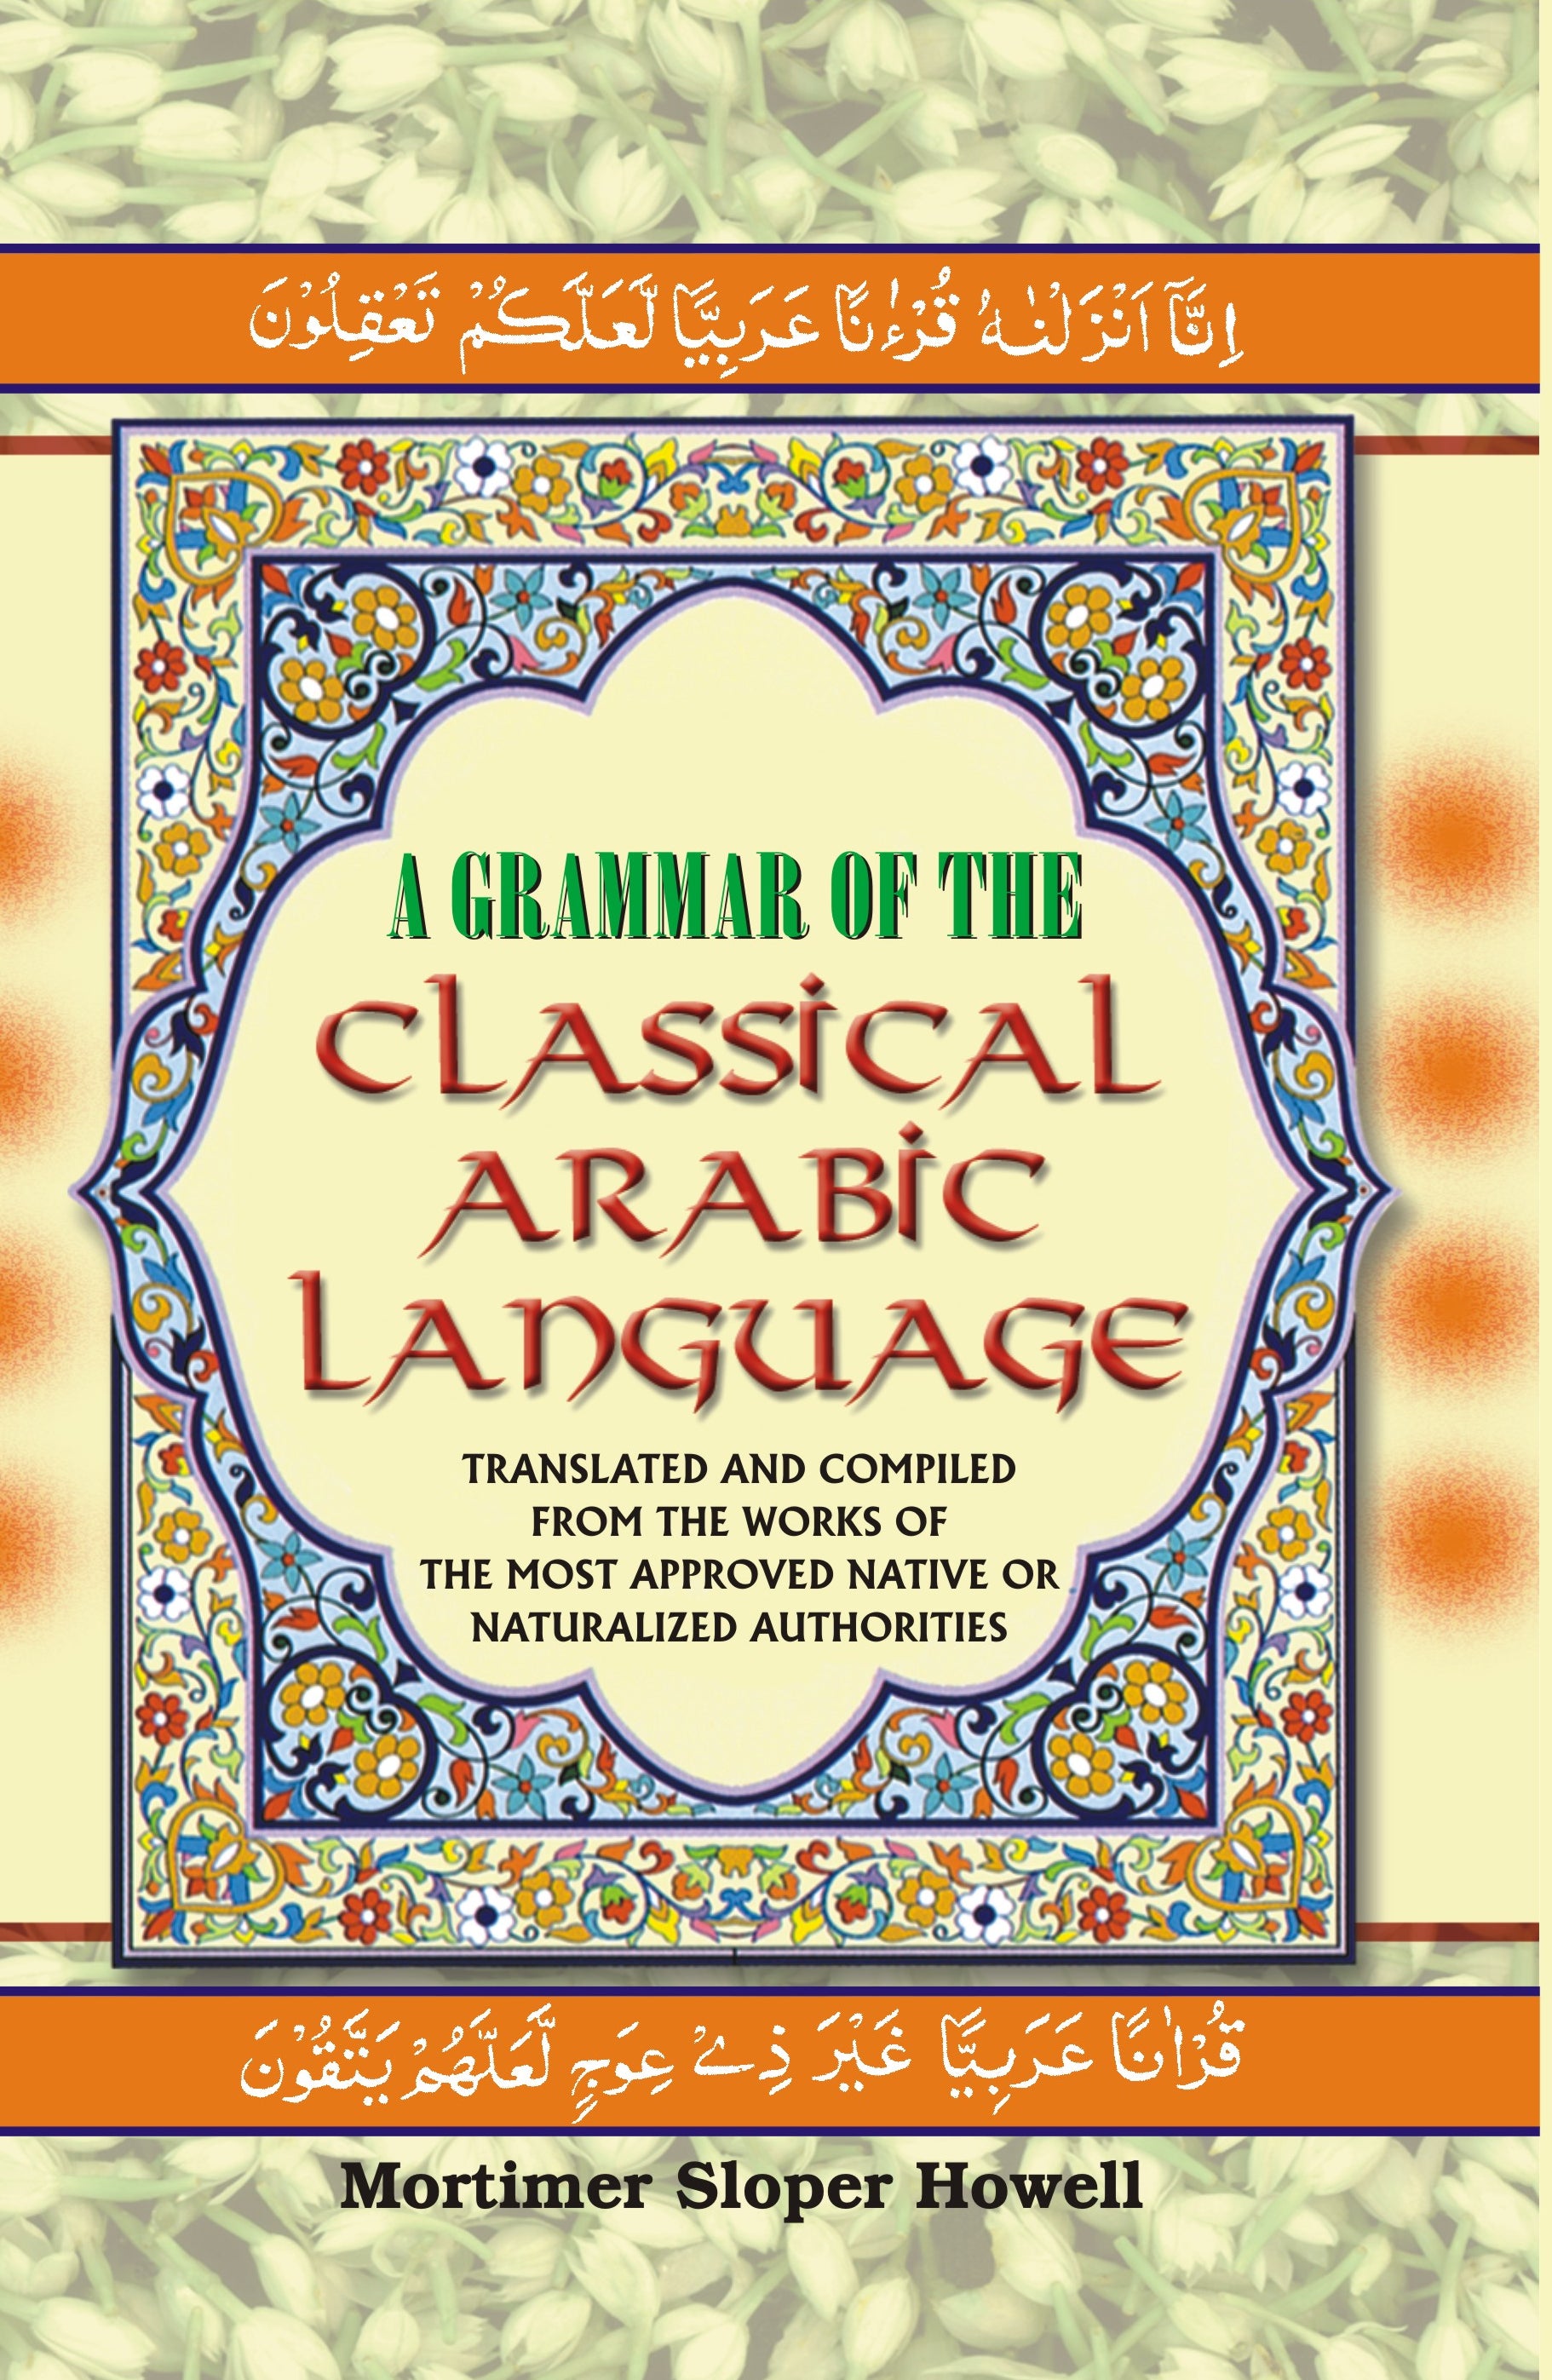 A Grammar of the Classical Arabic Language : Translated and Compiled From the Works of the Most Approved Native Or Naturalized Authorities (The Introduction, The Noun - Part 3) Volume Vol. 3rd [Hardcover]